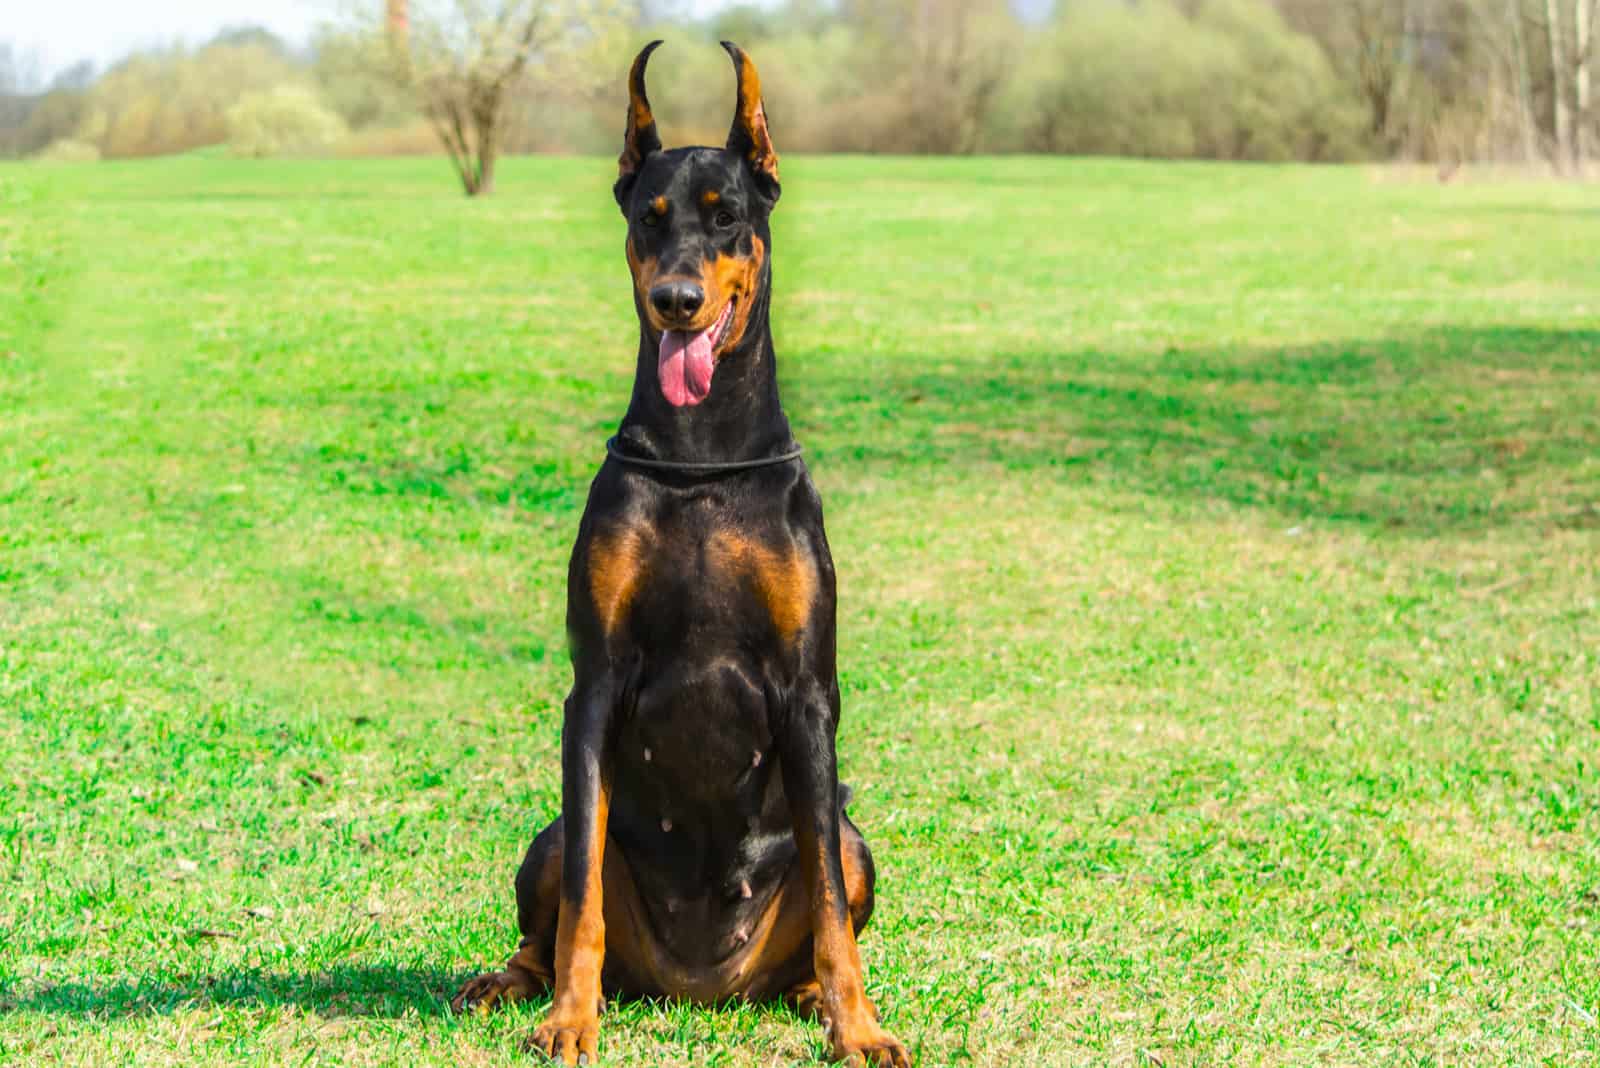 15 Best Dog Food For Doberman: Brands Your Pooch Will Adore